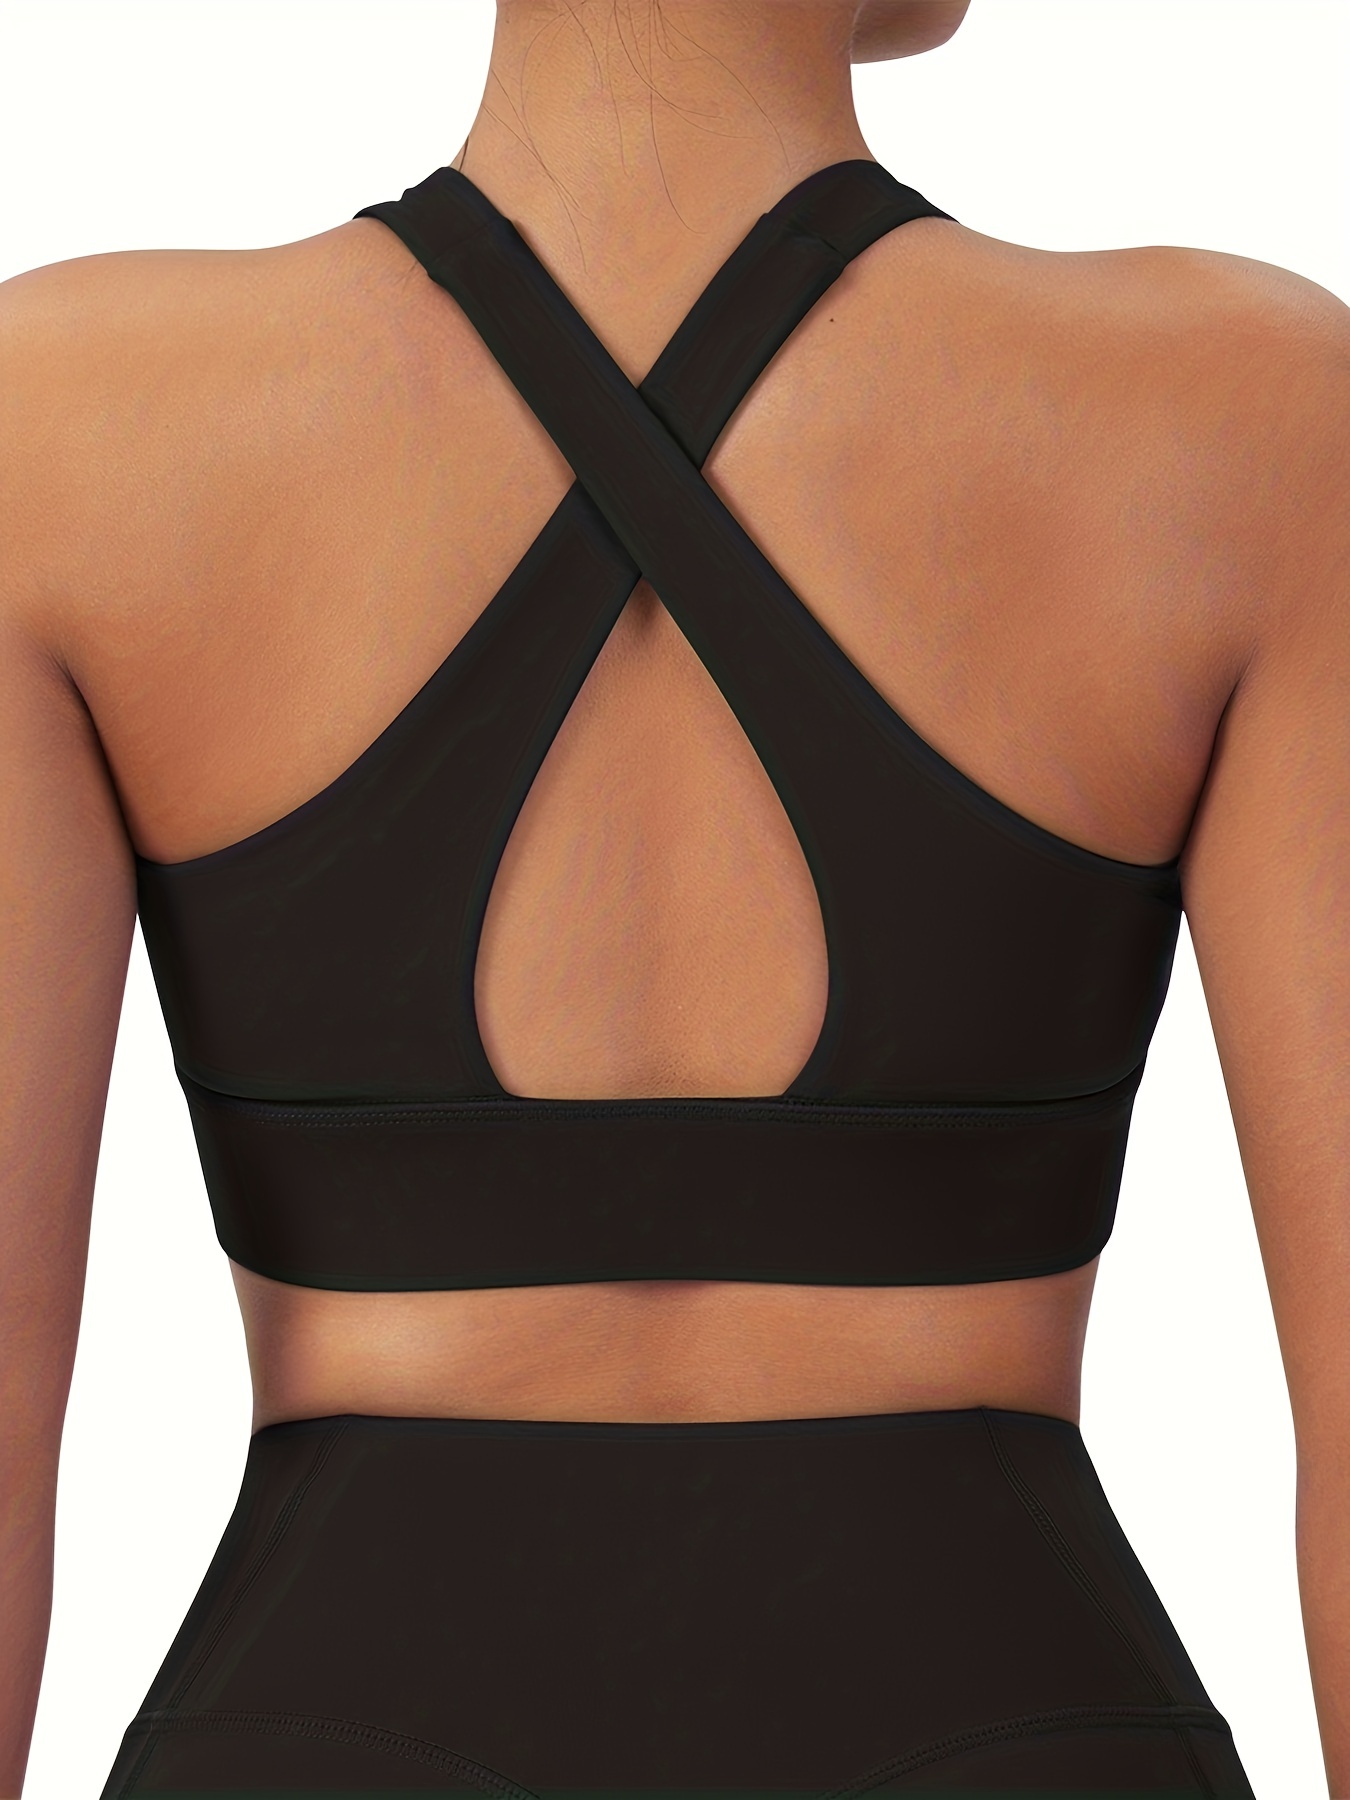 Backless Sports Bras for Women - Sexy Strappy Padded Workout Low